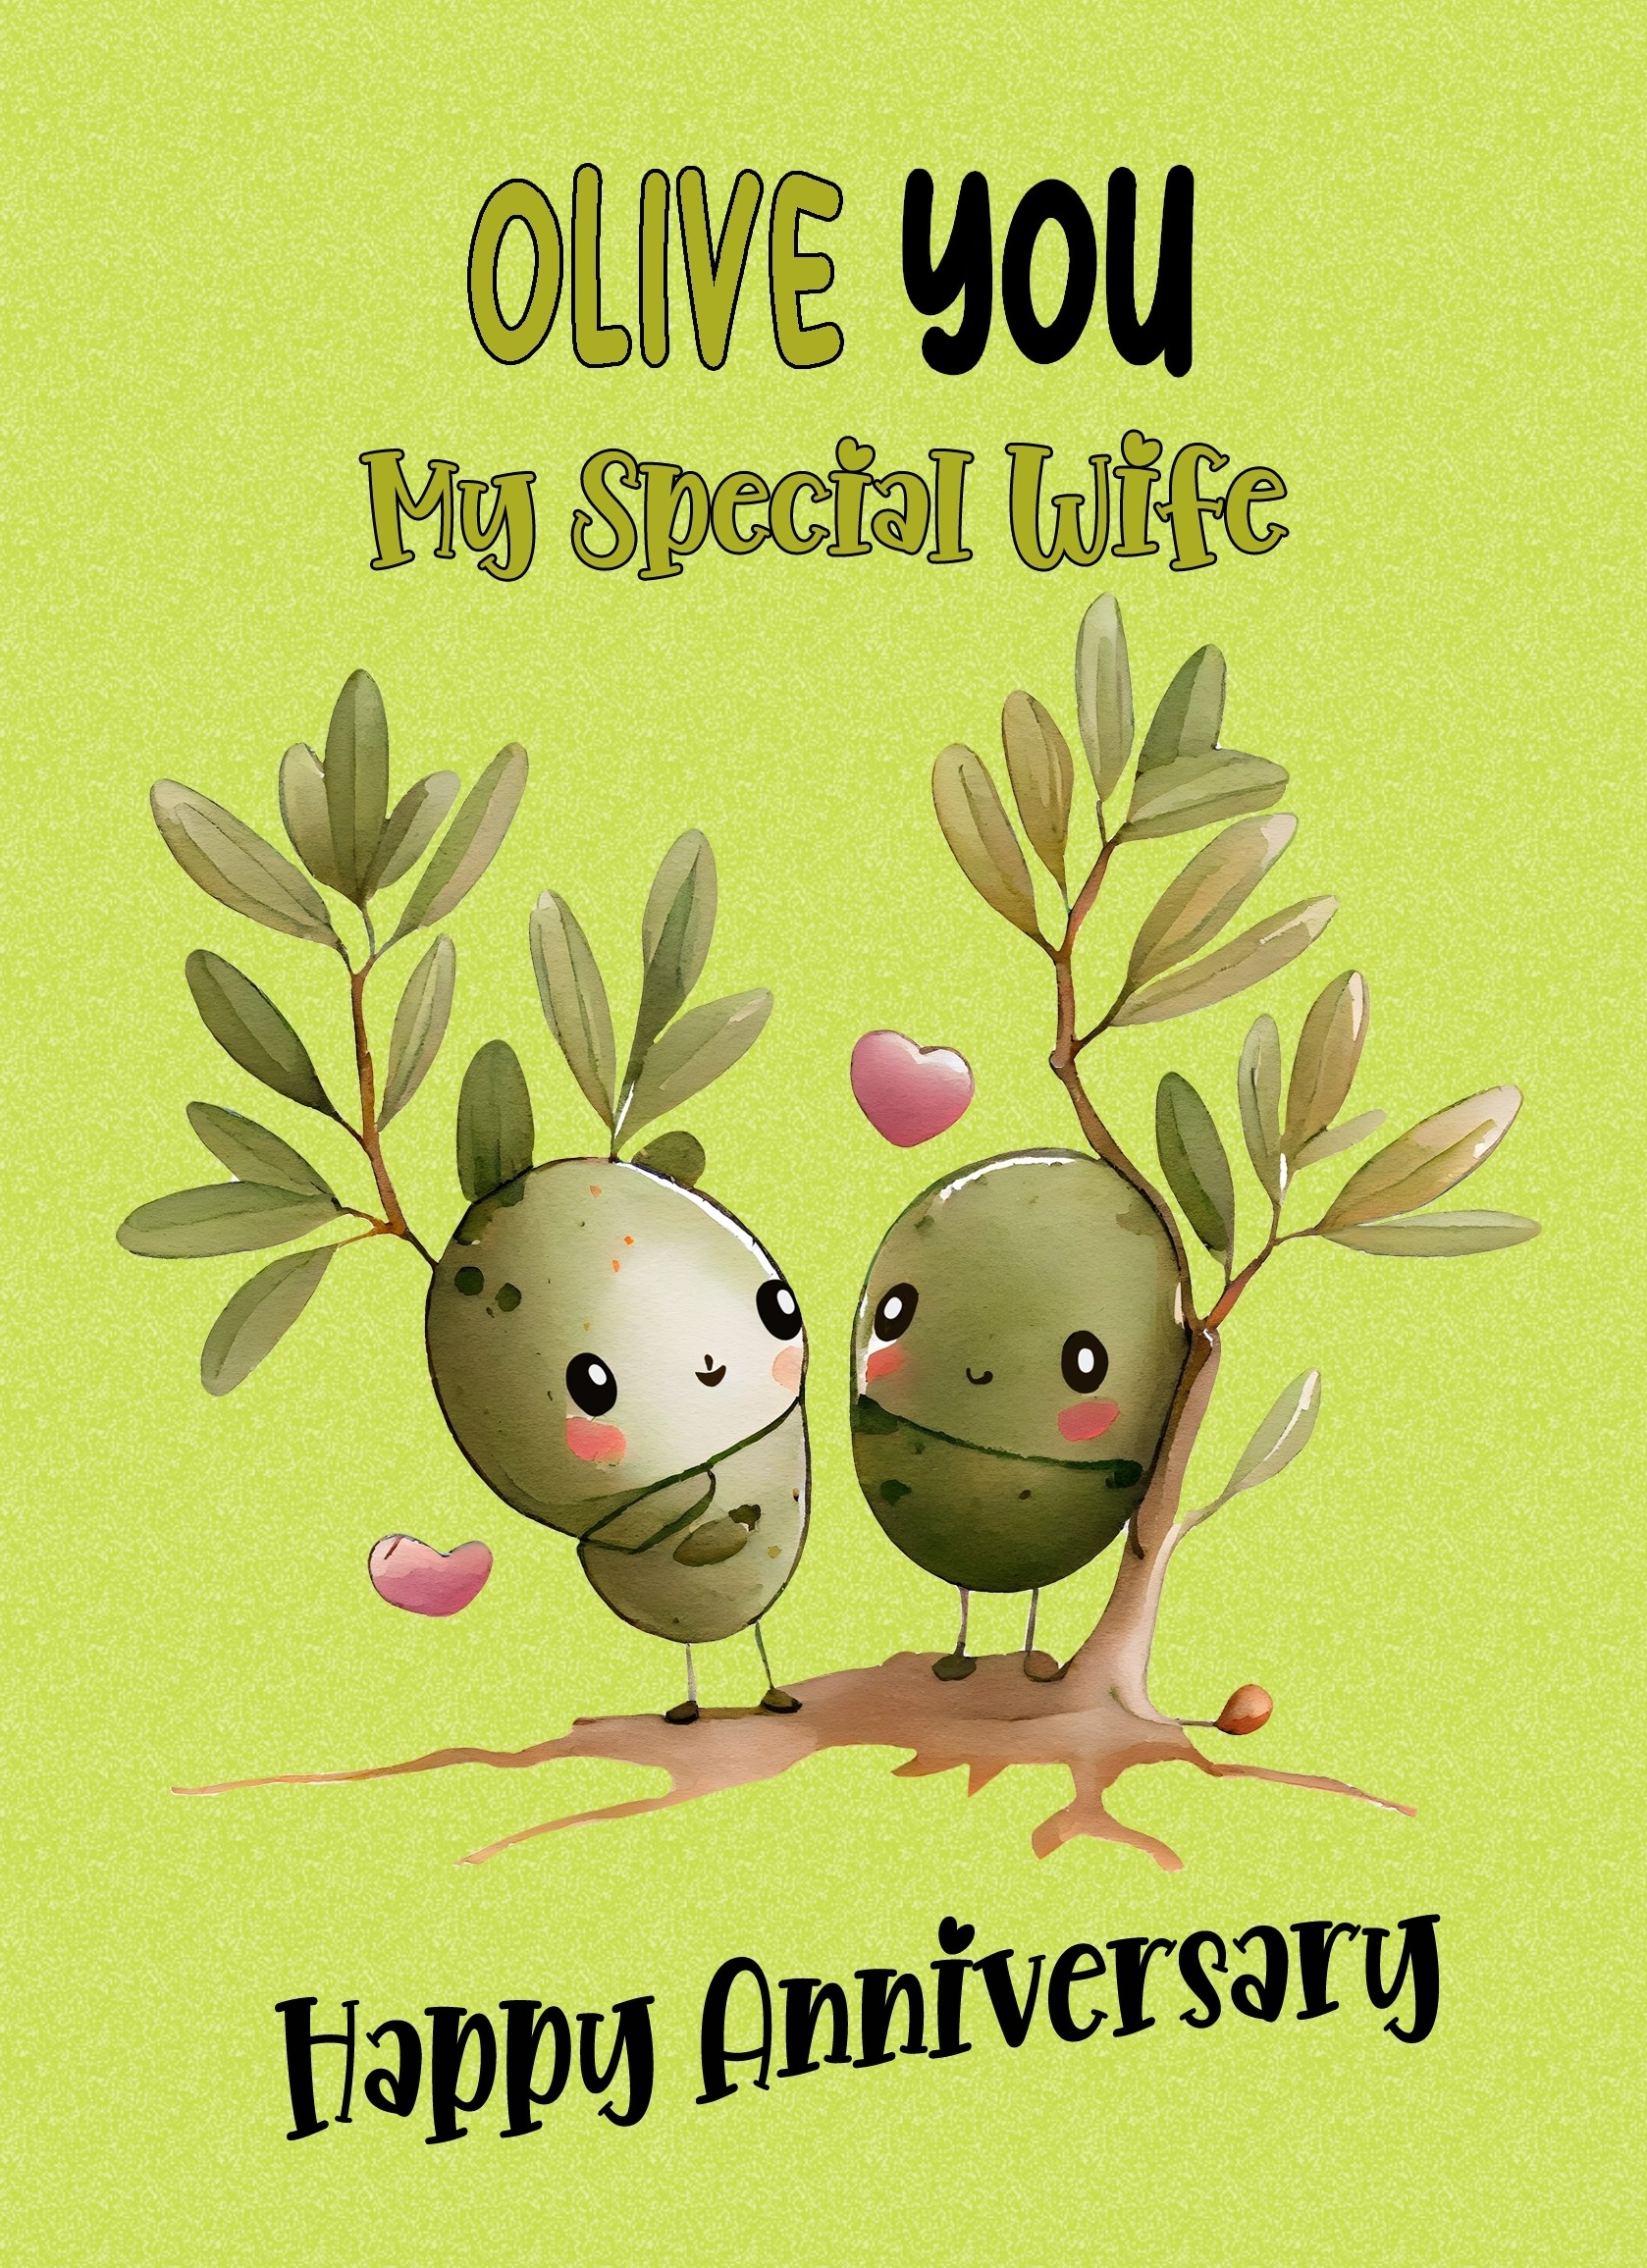 Funny Pun Romantic Anniversary Card for Wife (Olive You)